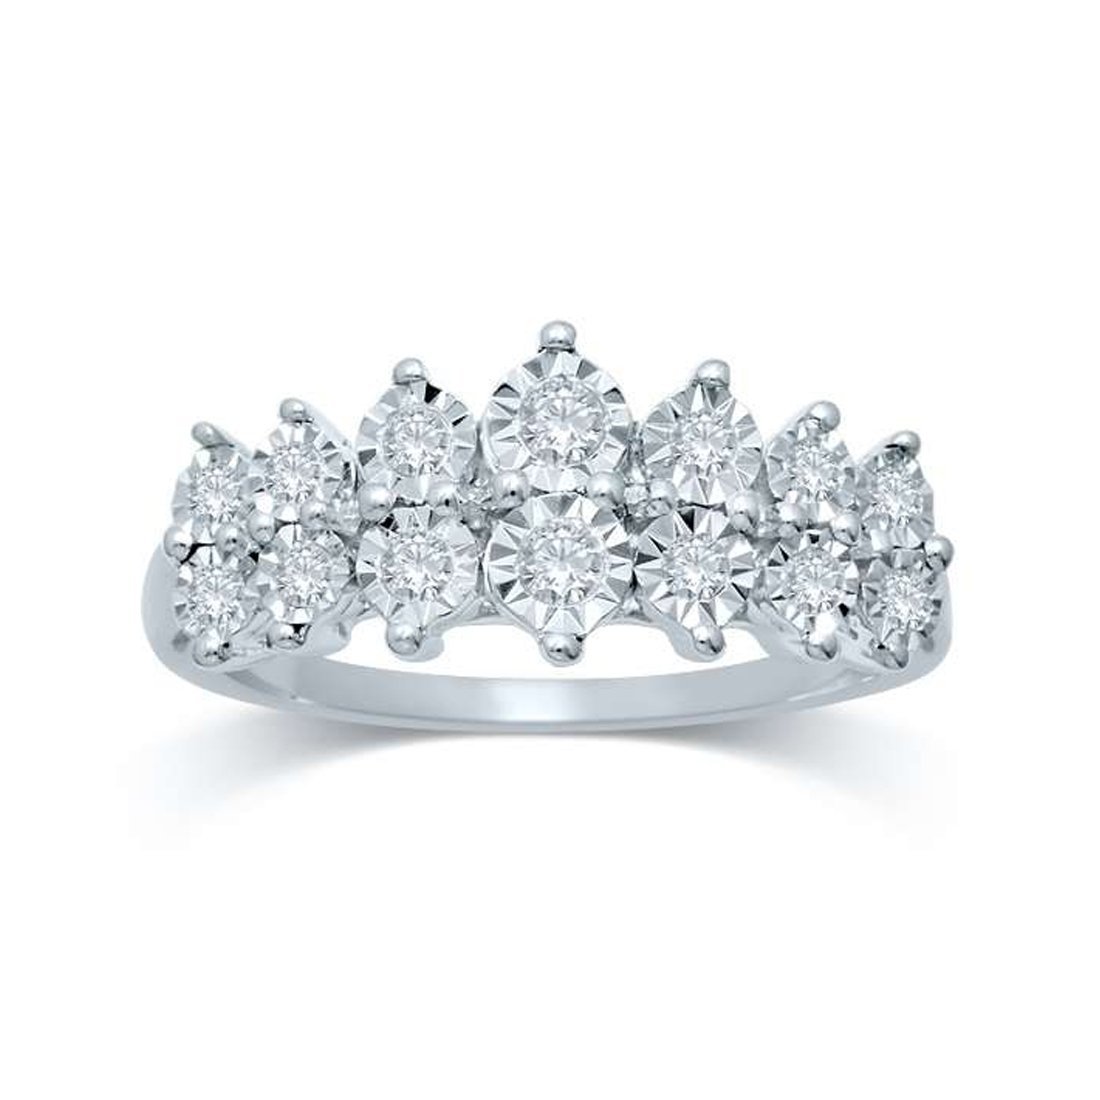 Brilliant Set 2 Row Ring with 1/4ct of Diamonds in 9ct White Gold Rings Bevilles 